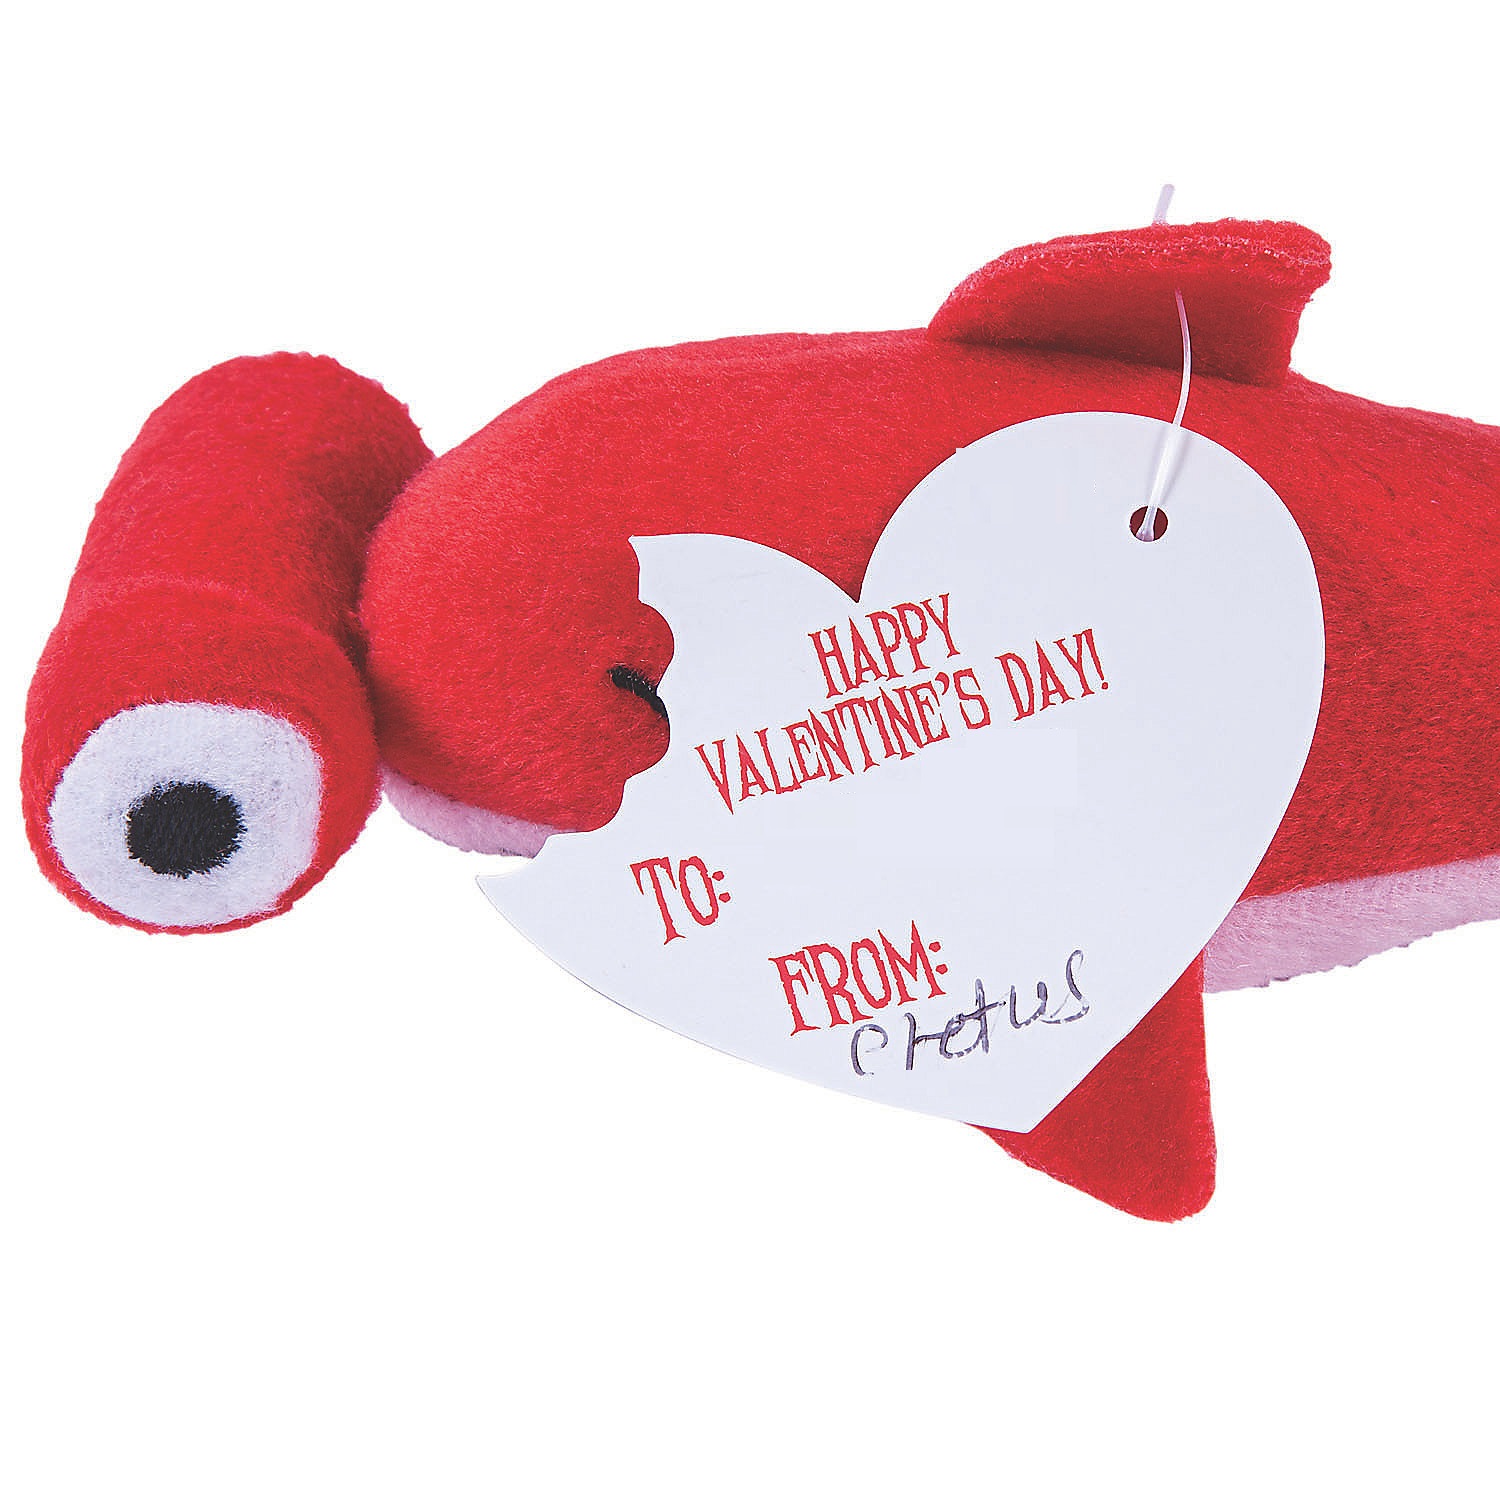 stuffed-hammerhead-shark-valentine-exchanges-with-card-for-12~13933407-a01